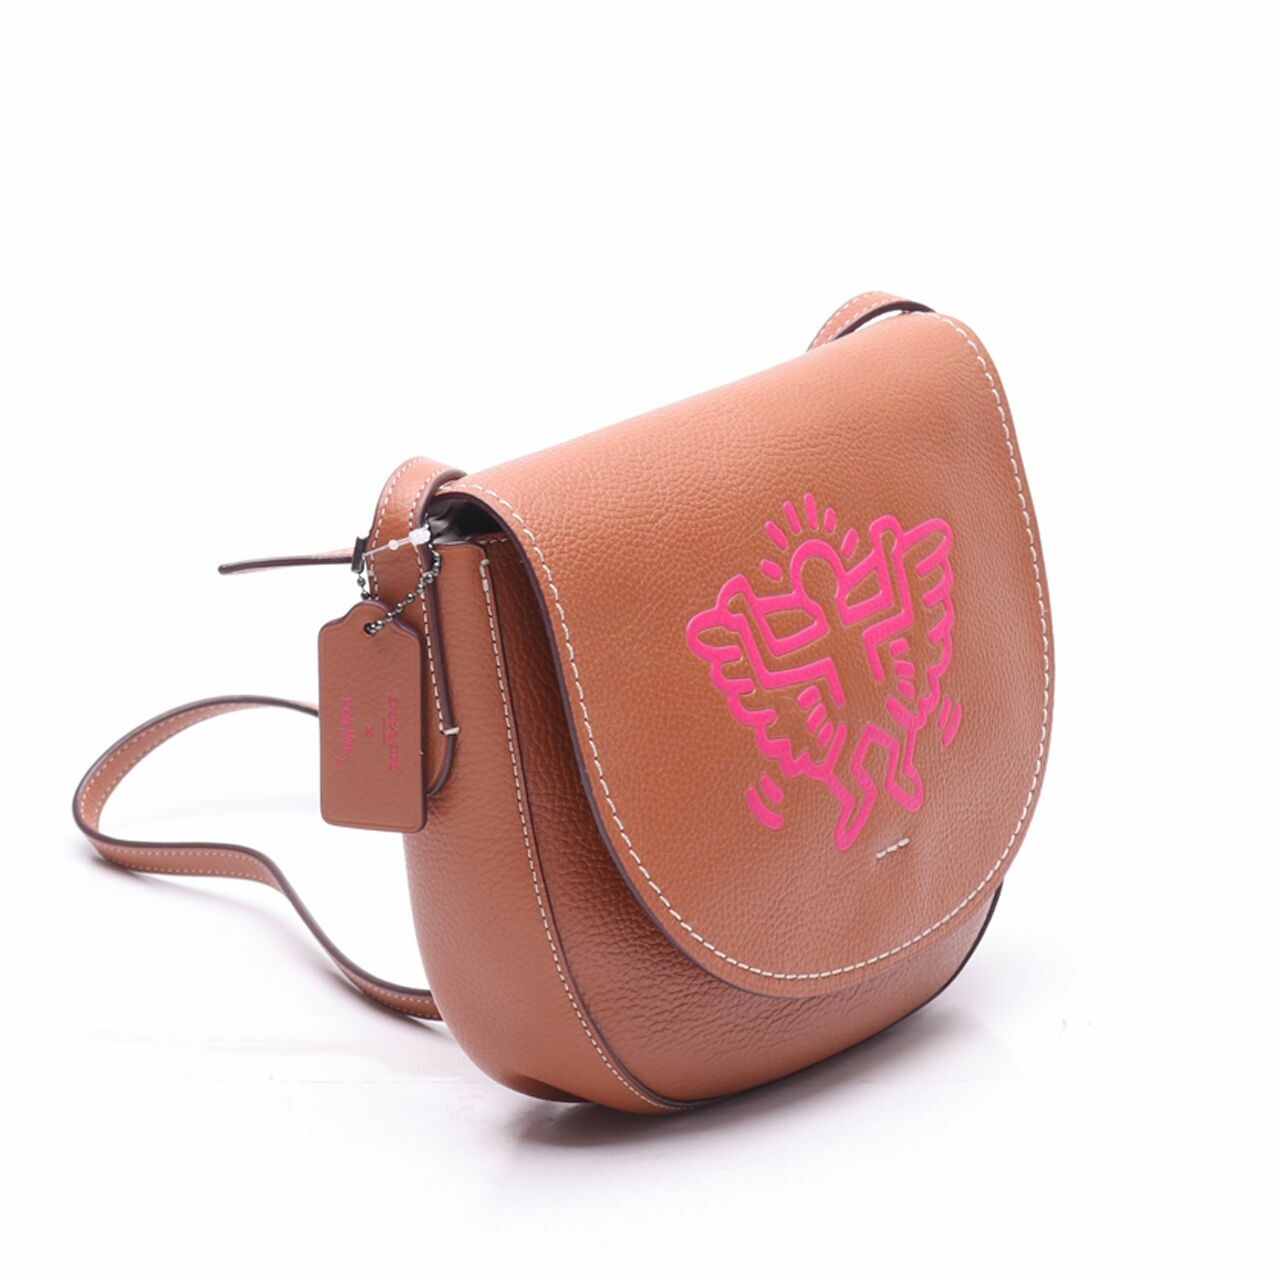 Coach Keith Haring Hudson Brown Leather Crossbody Bag